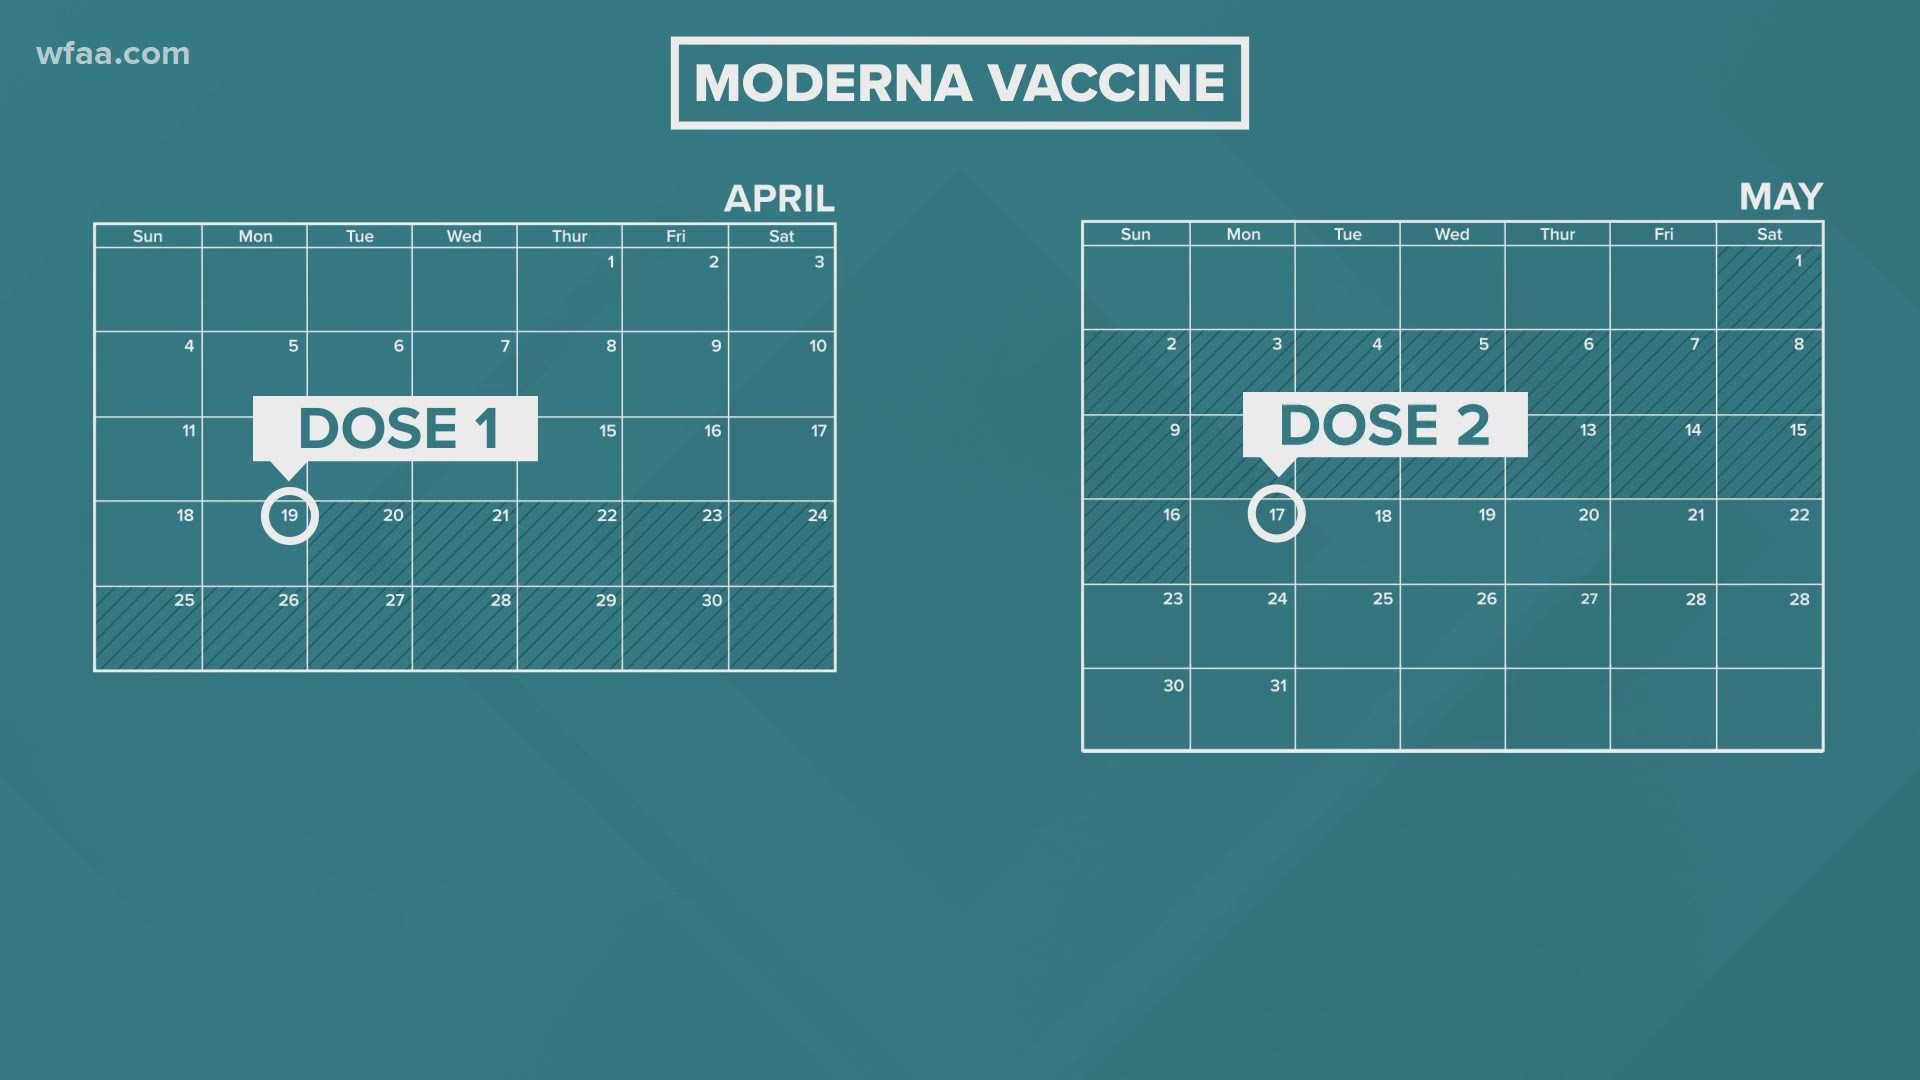 The good news is that vaccines are on their way, but don't expect a quick fix as people across the country manage to get two doses.